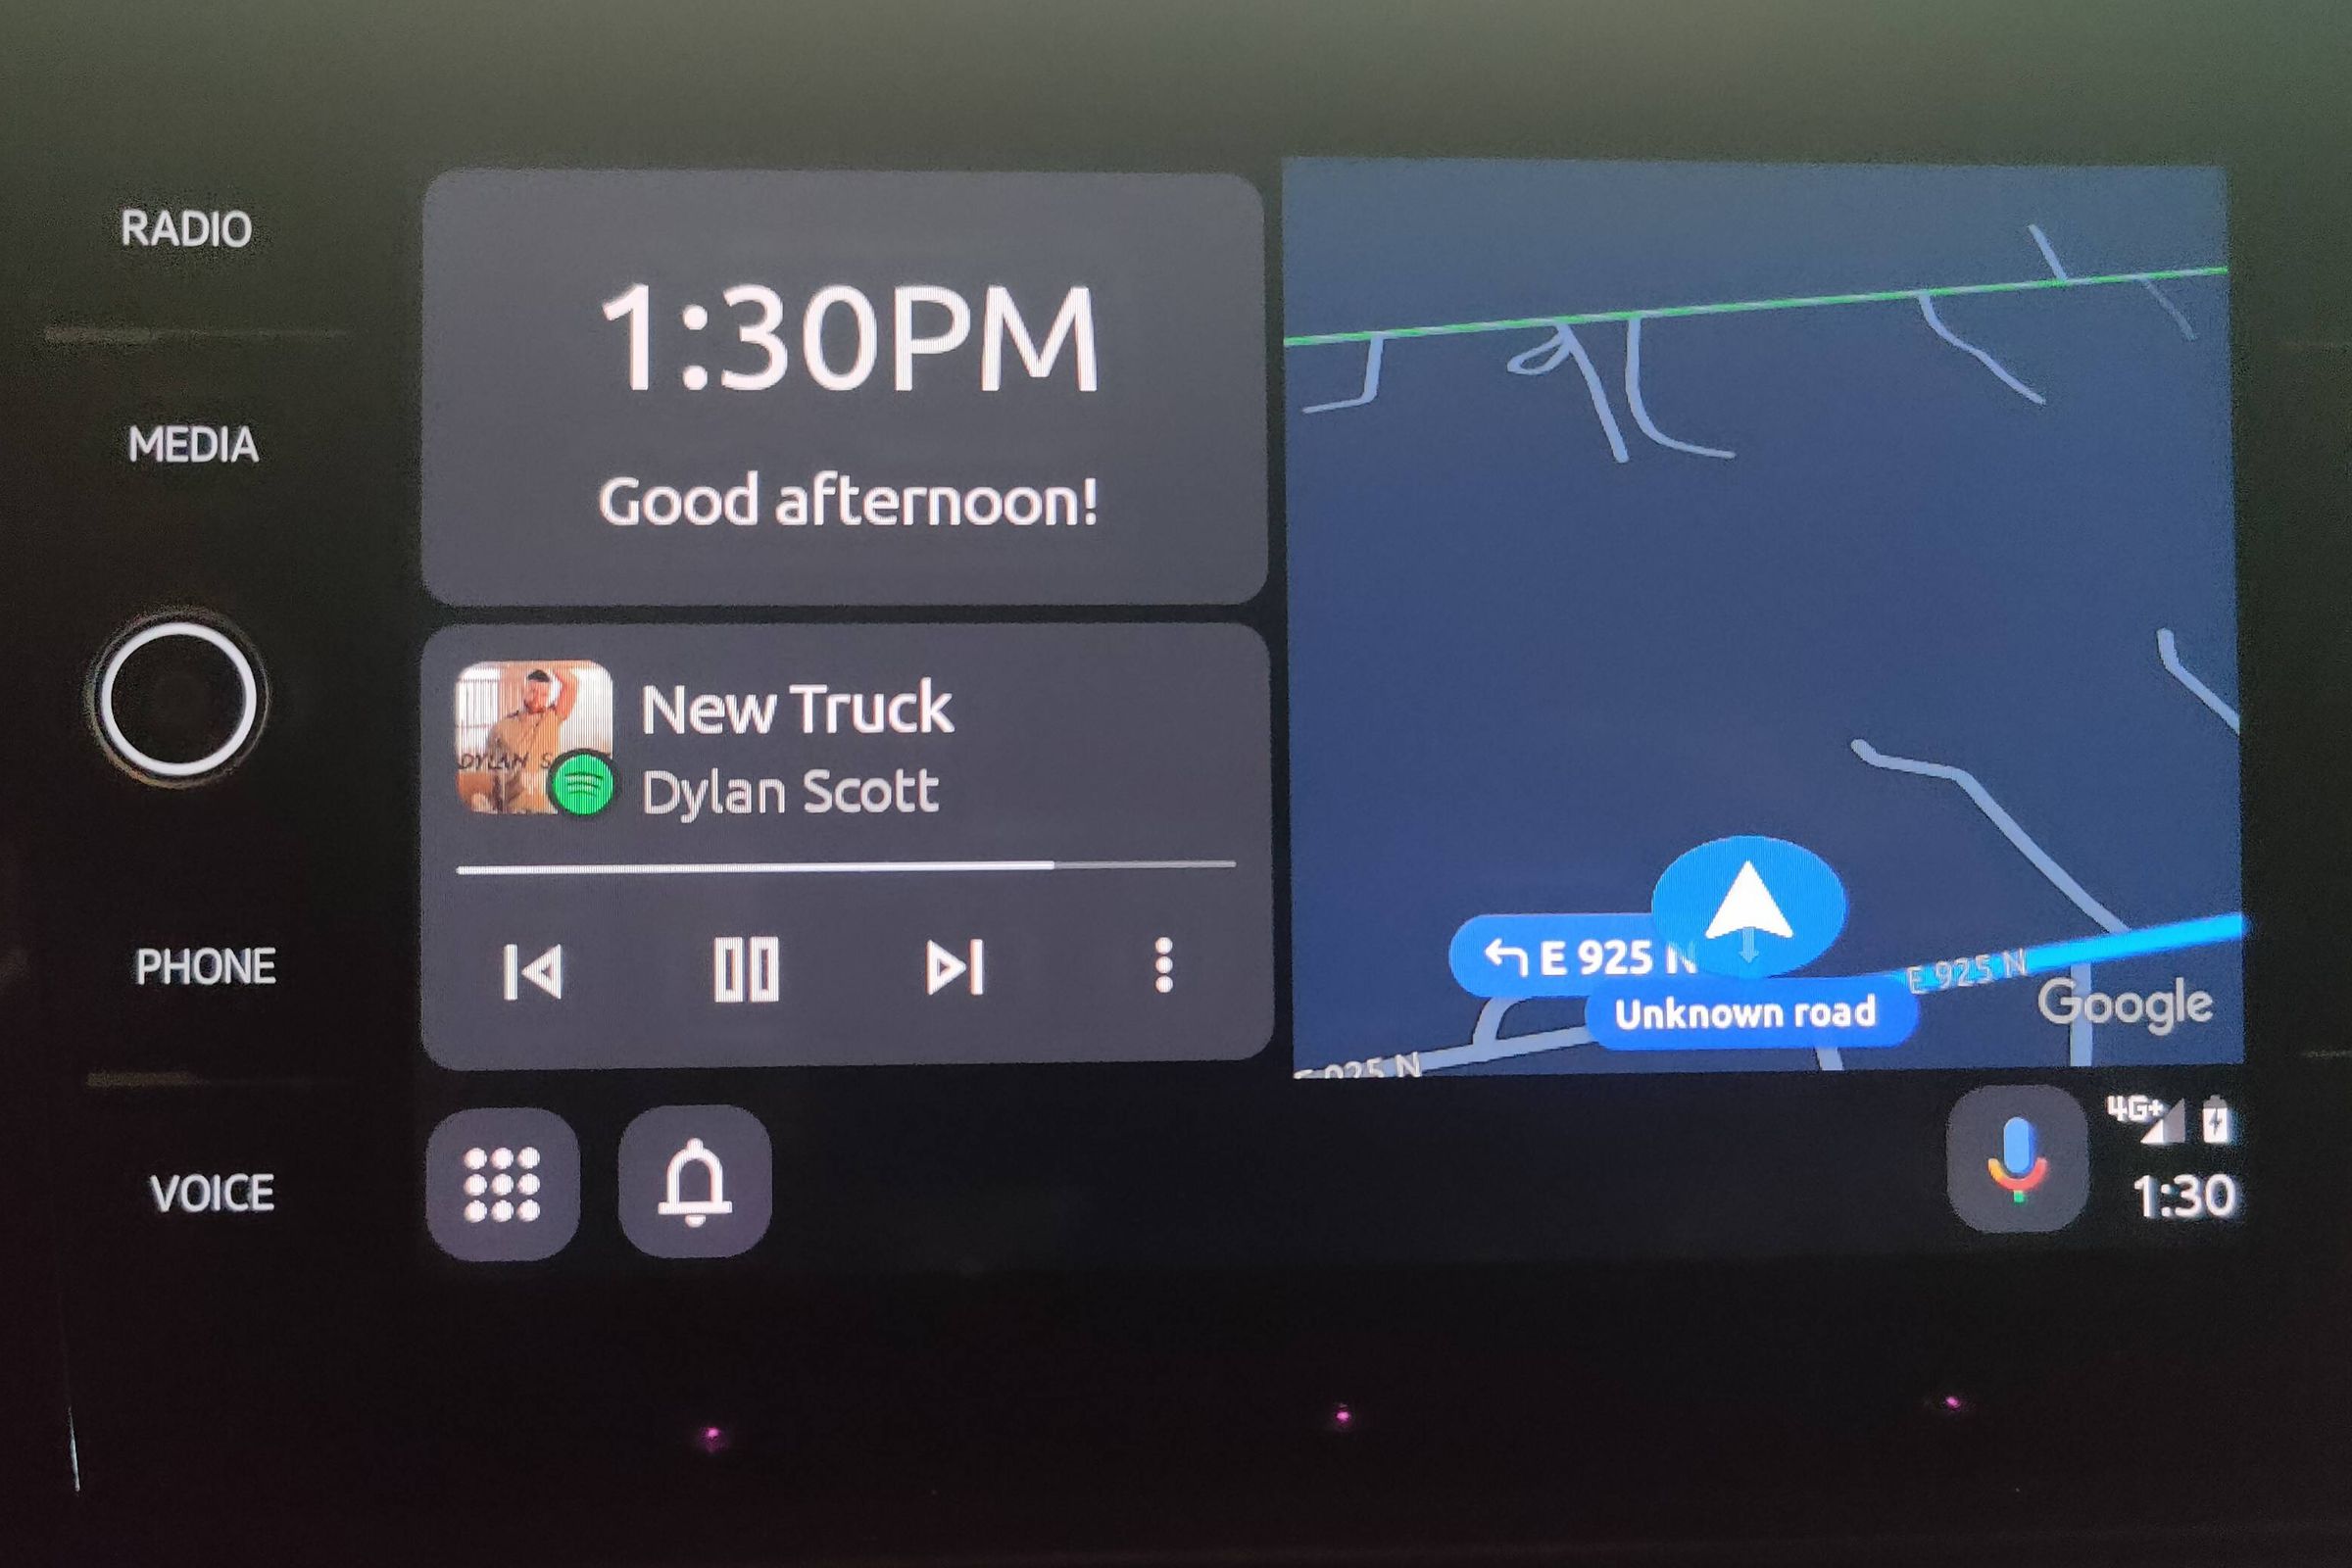 Android Auto’s new UI, codenamed “Coolwalk,” seen in leaked image.